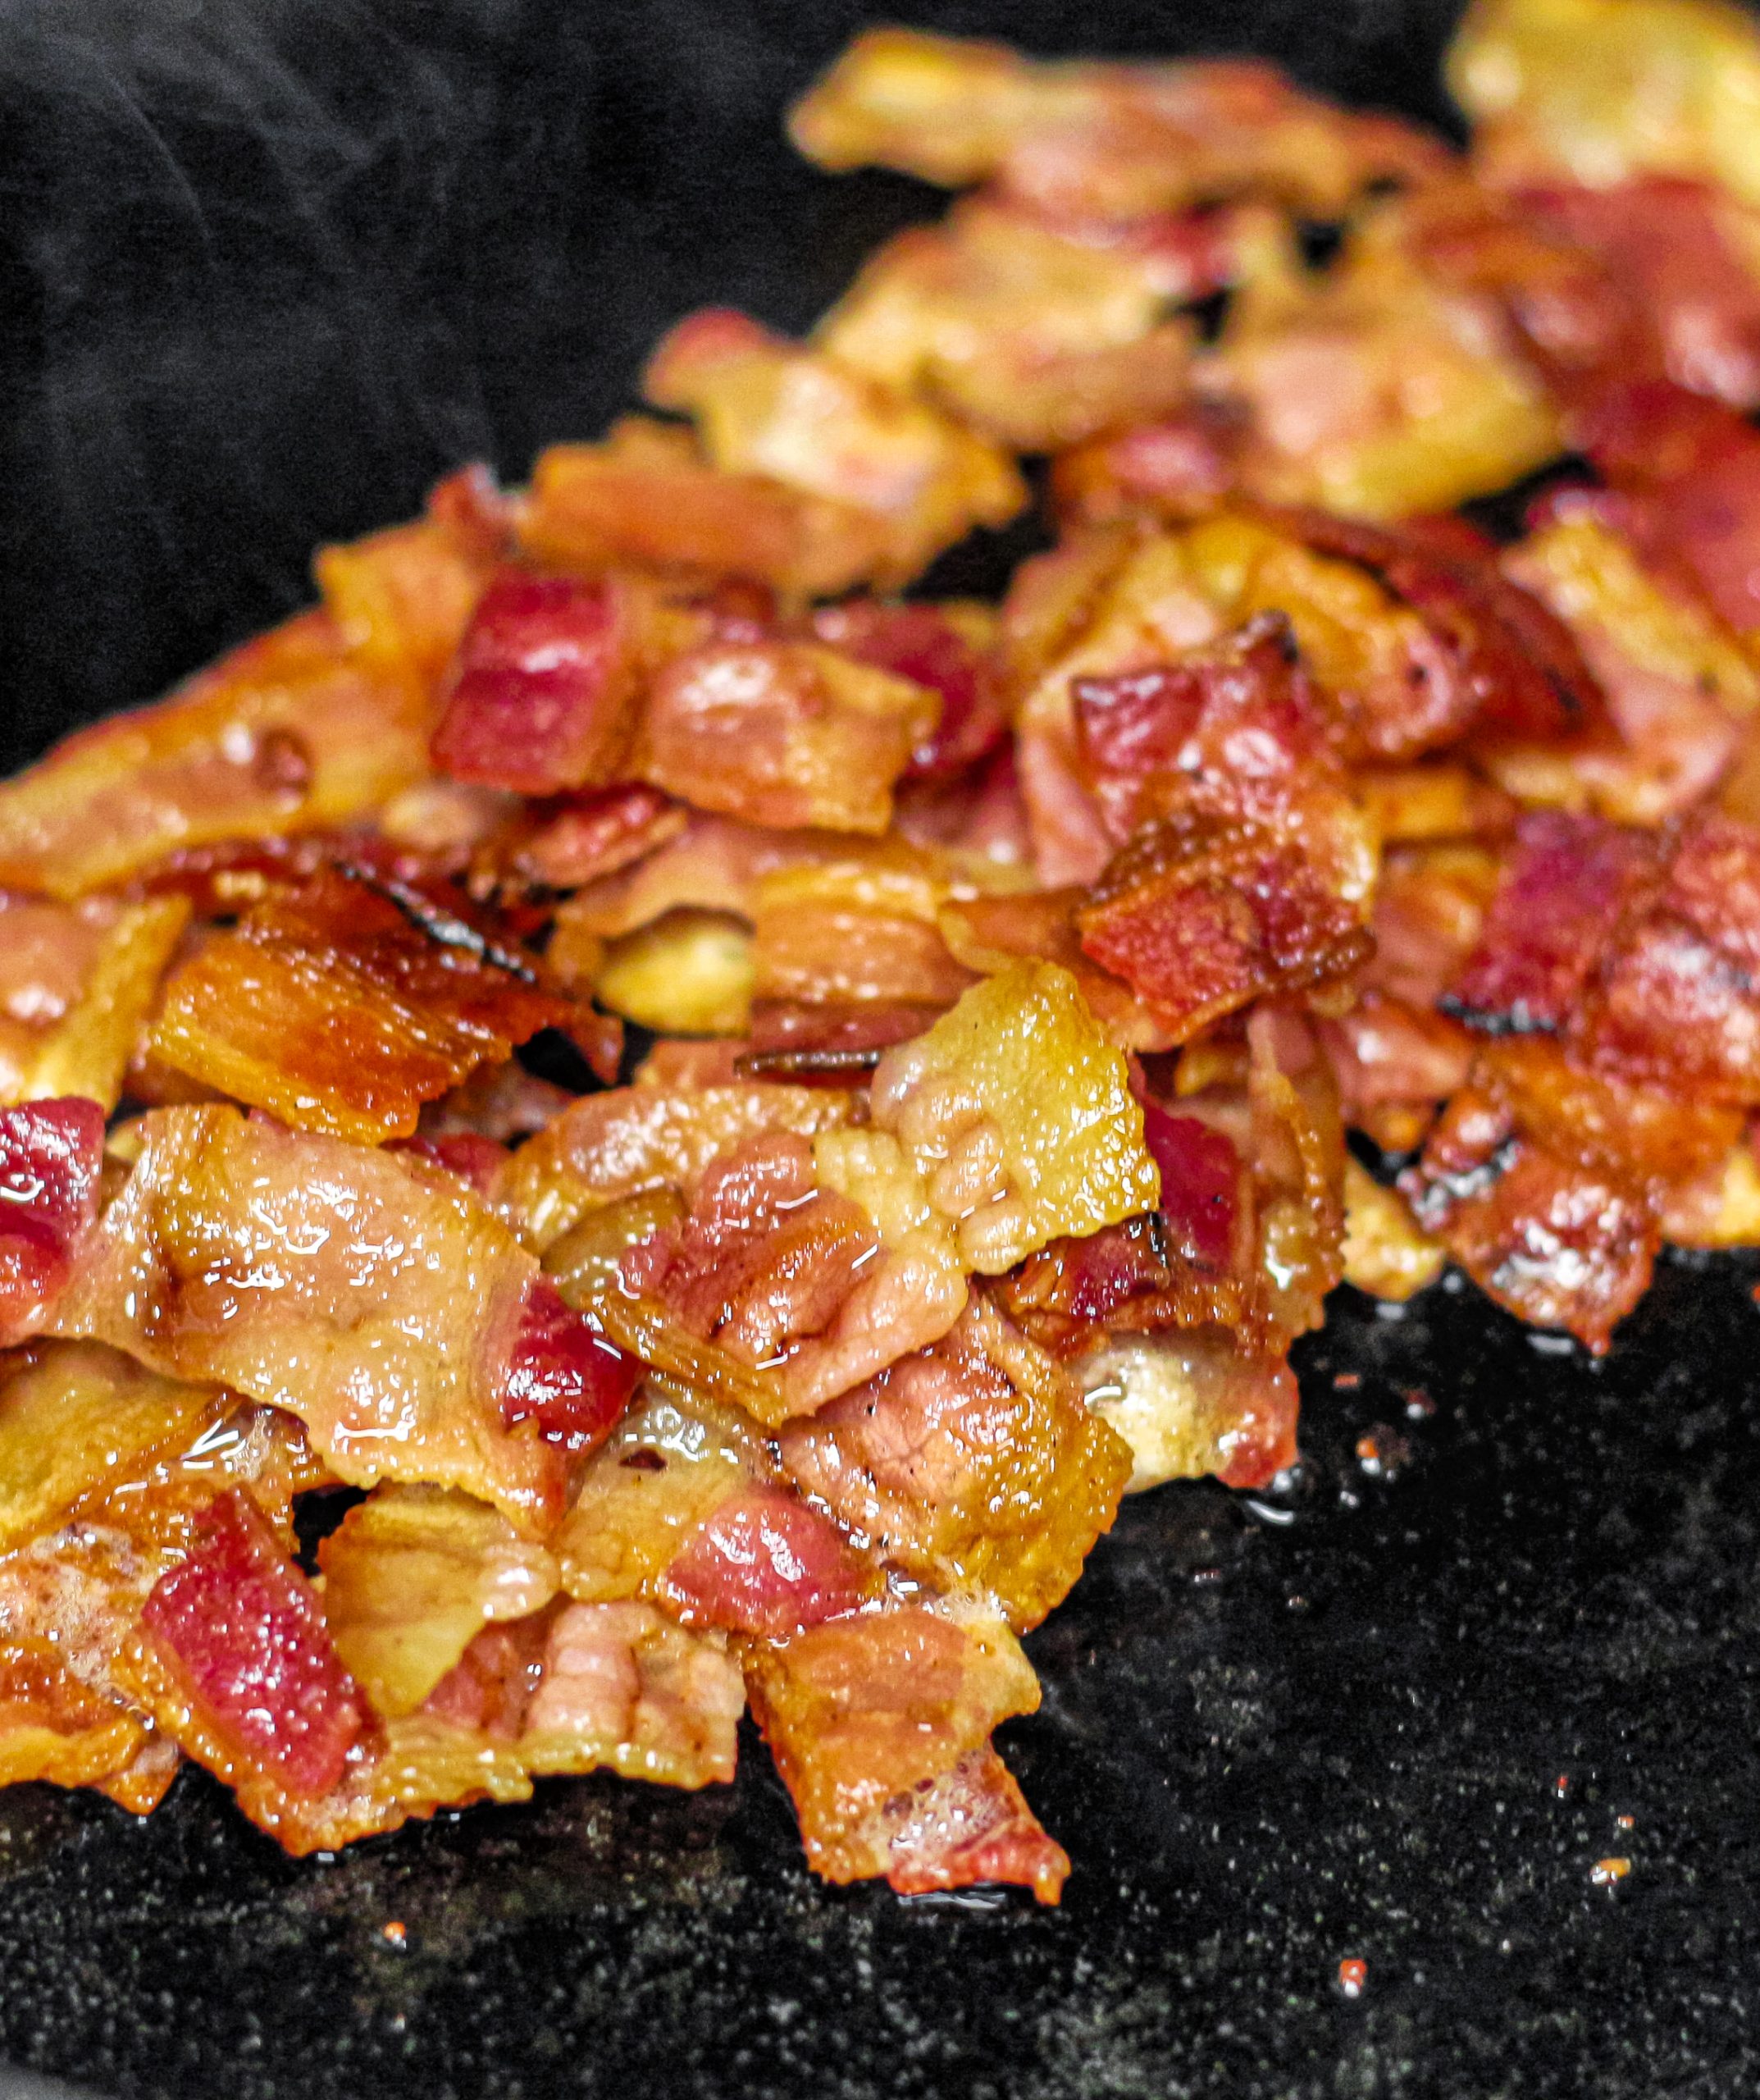 Using a large pan over medium heat, cook the bacon until crispy